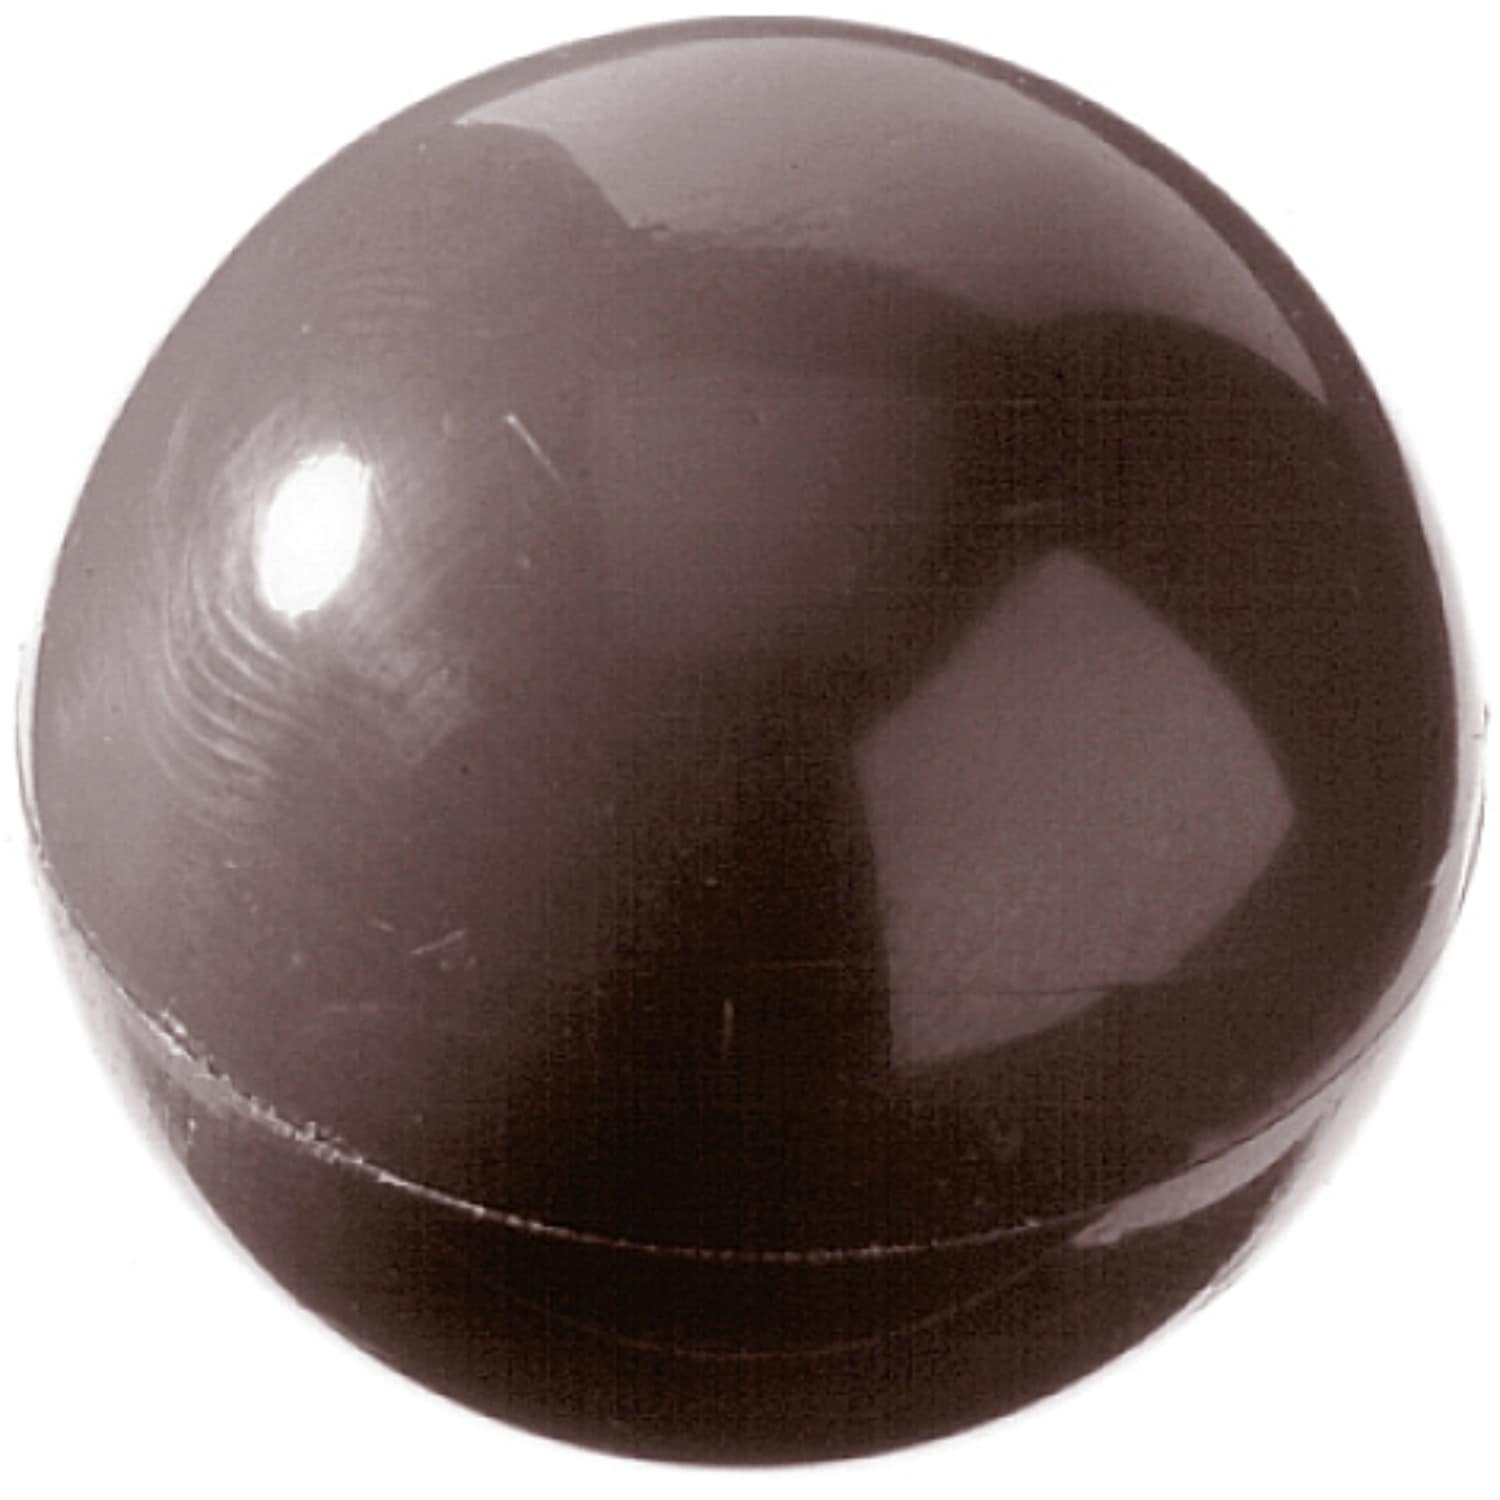 Chocolate mould "Sphere" 421158